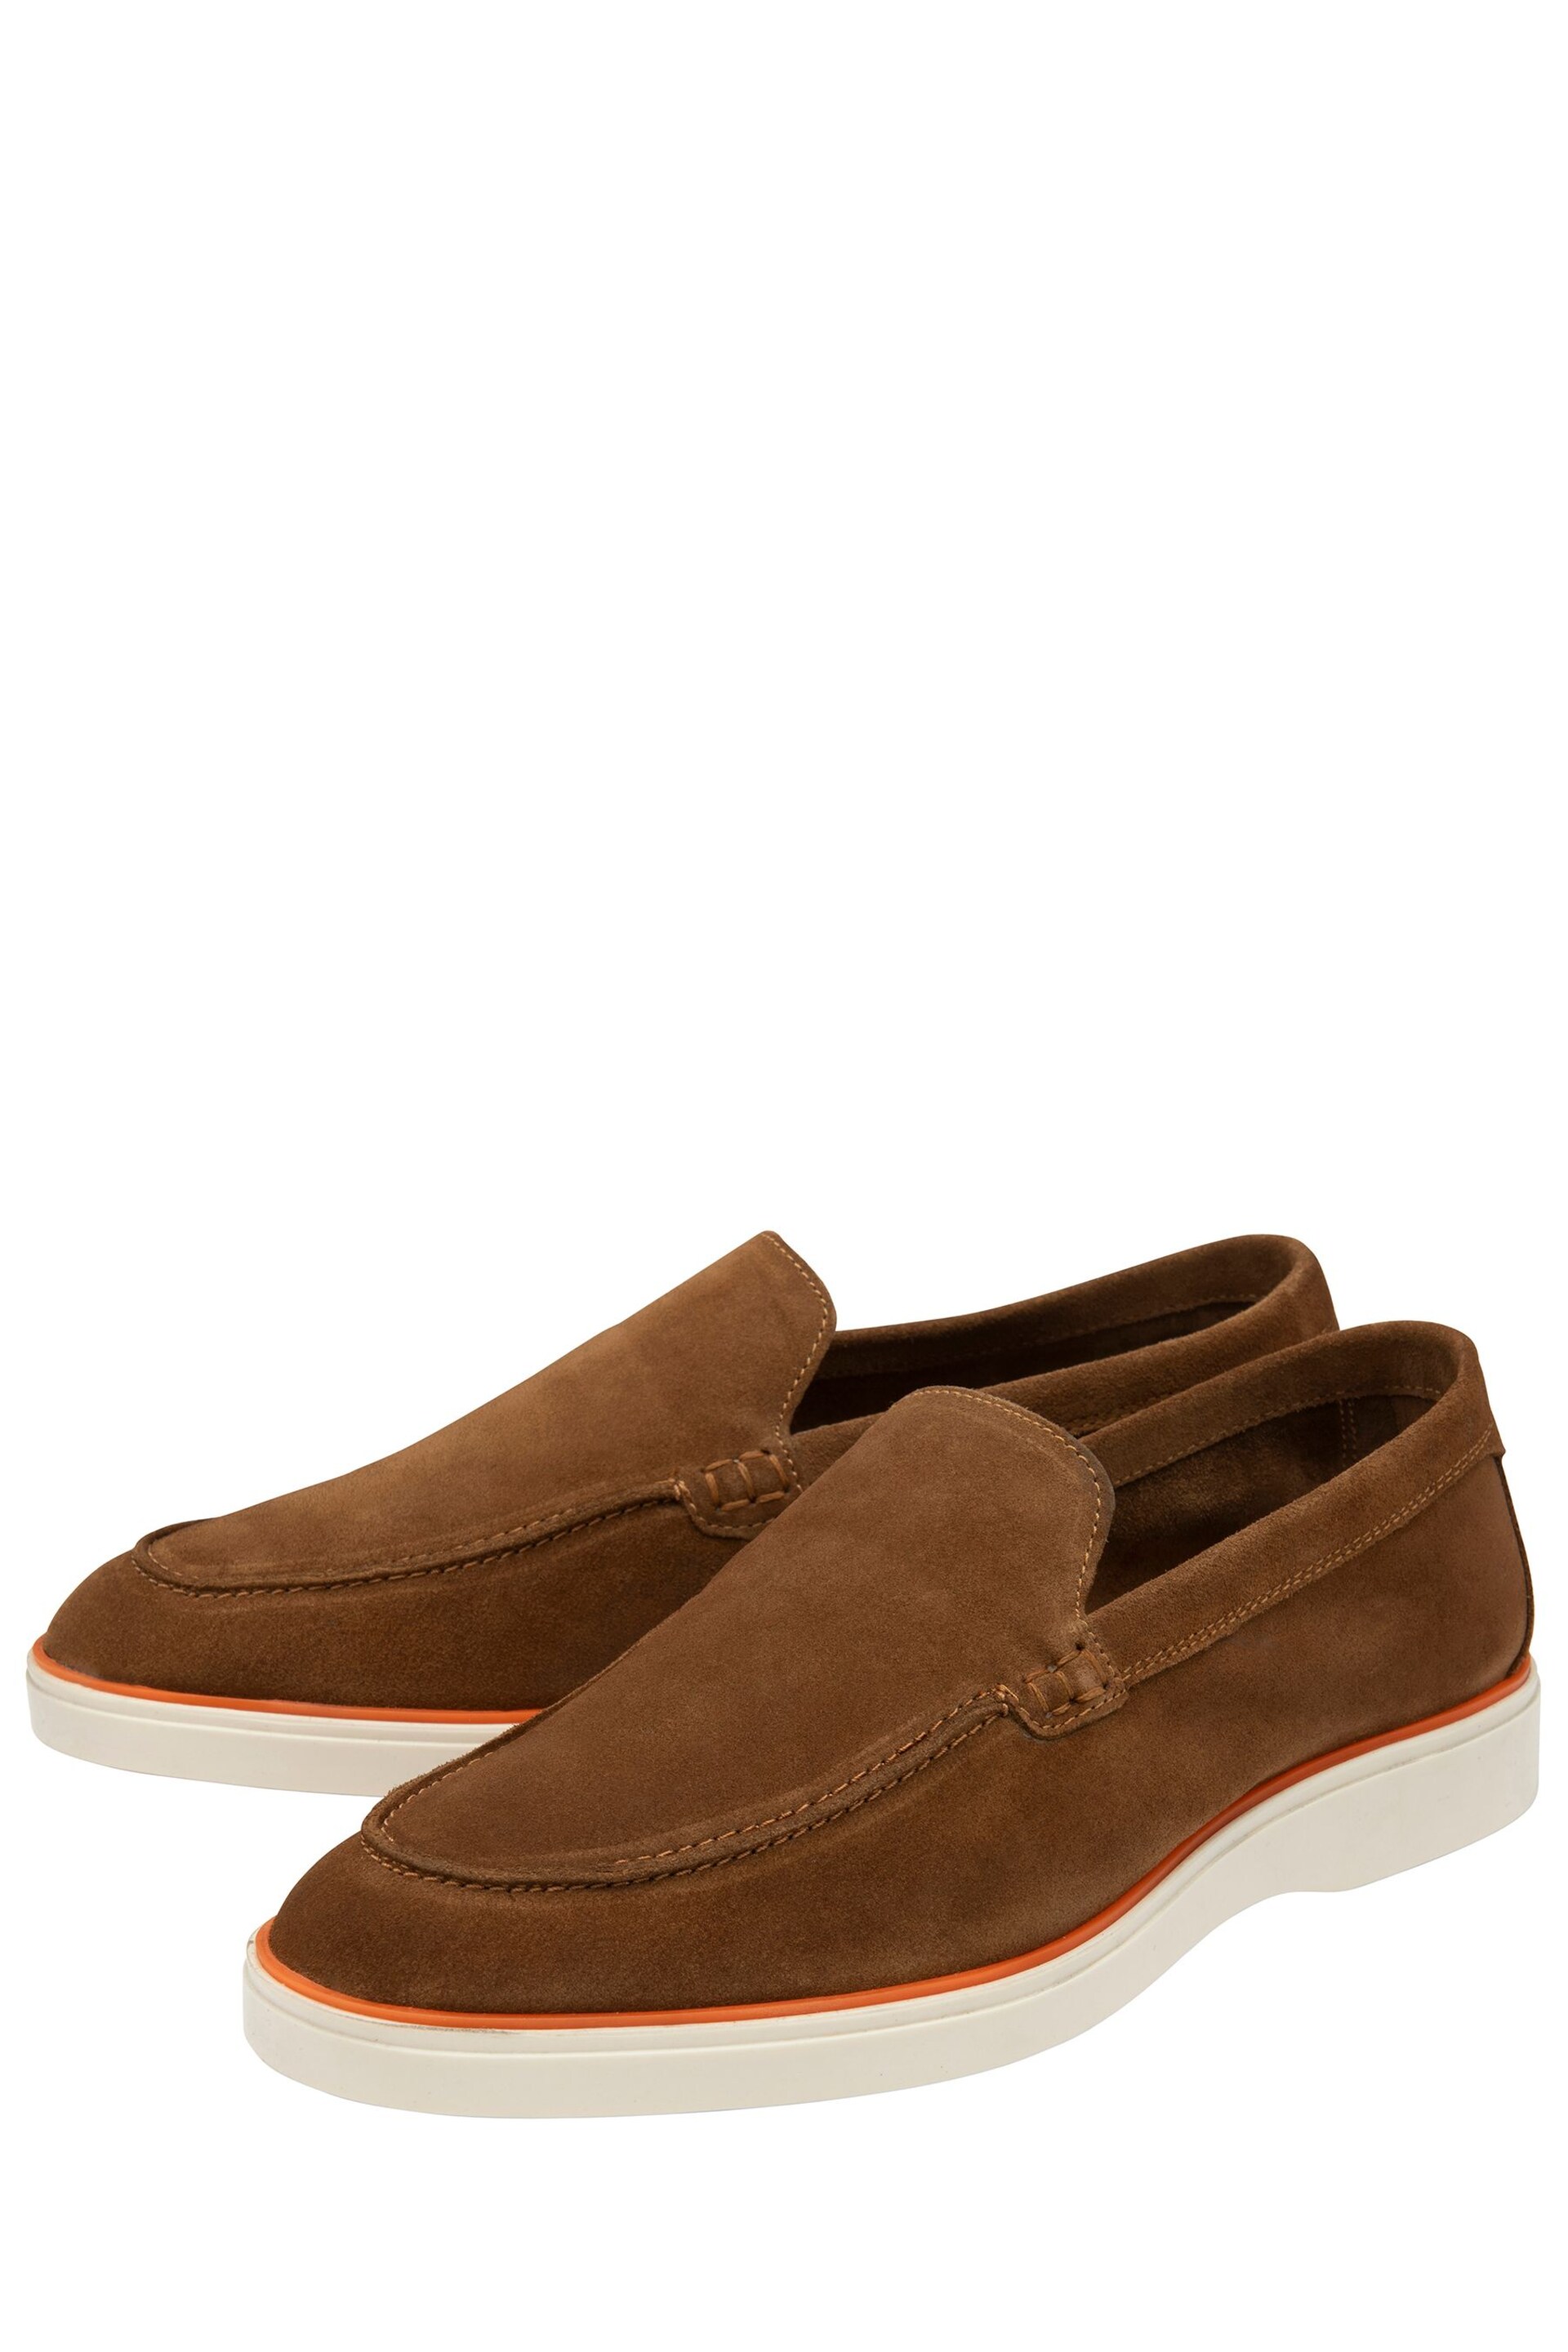 Frank Wright Brown Suede Slip-On Mens Loafers - Image 2 of 4